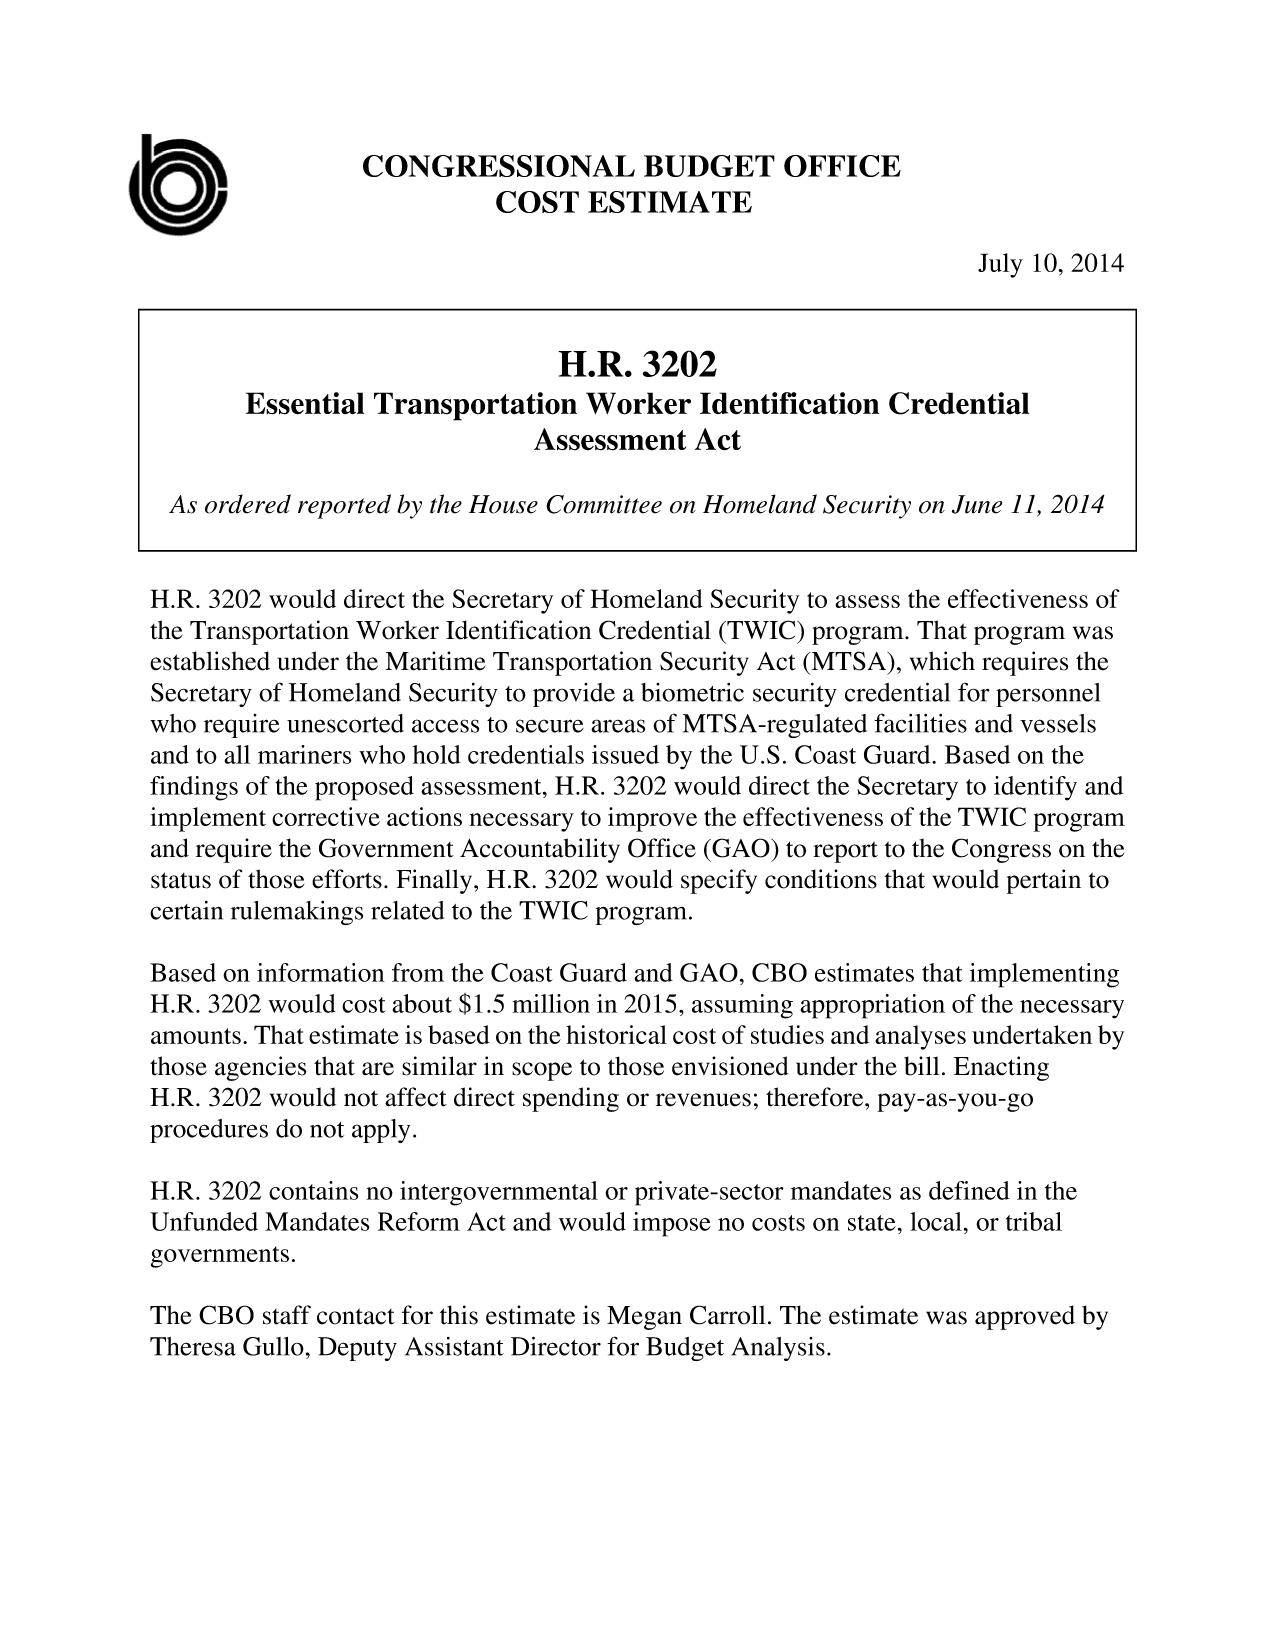 handle is hein.congrec/cbo1840 and id is 1 raw text is: CONGRESSIONAL BUDGET OFFICE
COST ESTIMATE
July 10, 2014
H.R. 3202
Essential Transportation Worker Identification Credential
Assessment Act
As ordered reported by the House Committee on Homeland Security on June 11, 2014
H.R. 3202 would direct the Secretary of Homeland Security to assess the effectiveness of
the Transportation Worker Identification Credential (TWIC) program. That program was
established under the Maritime Transportation Security Act (MTSA), which requires the
Secretary of Homeland Security to provide a biometric security credential for personnel
who require unescorted access to secure areas of MTSA-regulated facilities and vessels
and to all mariners who hold credentials issued by the U.S. Coast Guard. Based on the
findings of the proposed assessment, H.R. 3202 would direct the Secretary to identify and
implement corrective actions necessary to improve the effectiveness of the TWIC program
and require the Government Accountability Office (GAO) to report to the Congress on the
status of those efforts. Finally, H.R. 3202 would specify conditions that would pertain to
certain rulemakings related to the TWIC program.
Based on information from the Coast Guard and GAO, CBO estimates that implementing
H.R. 3202 would cost about $1.5 million in 2015, assuming appropriation of the necessary
amounts. That estimate is based on the historical cost of studies and analyses undertaken by
those agencies that are similar in scope to those envisioned under the bill. Enacting
H.R. 3202 would not affect direct spending or revenues; therefore, pay-as-you-go
procedures do not apply.
H.R. 3202 contains no intergovernmental or private-sector mandates as defined in the
Unfunded Mandates Reform Act and would impose no costs on state, local, or tribal
governments.
The CBO staff contact for this estimate is Megan Carroll. The estimate was approved by
Theresa Gullo, Deputy Assistant Director for Budget Analysis.


